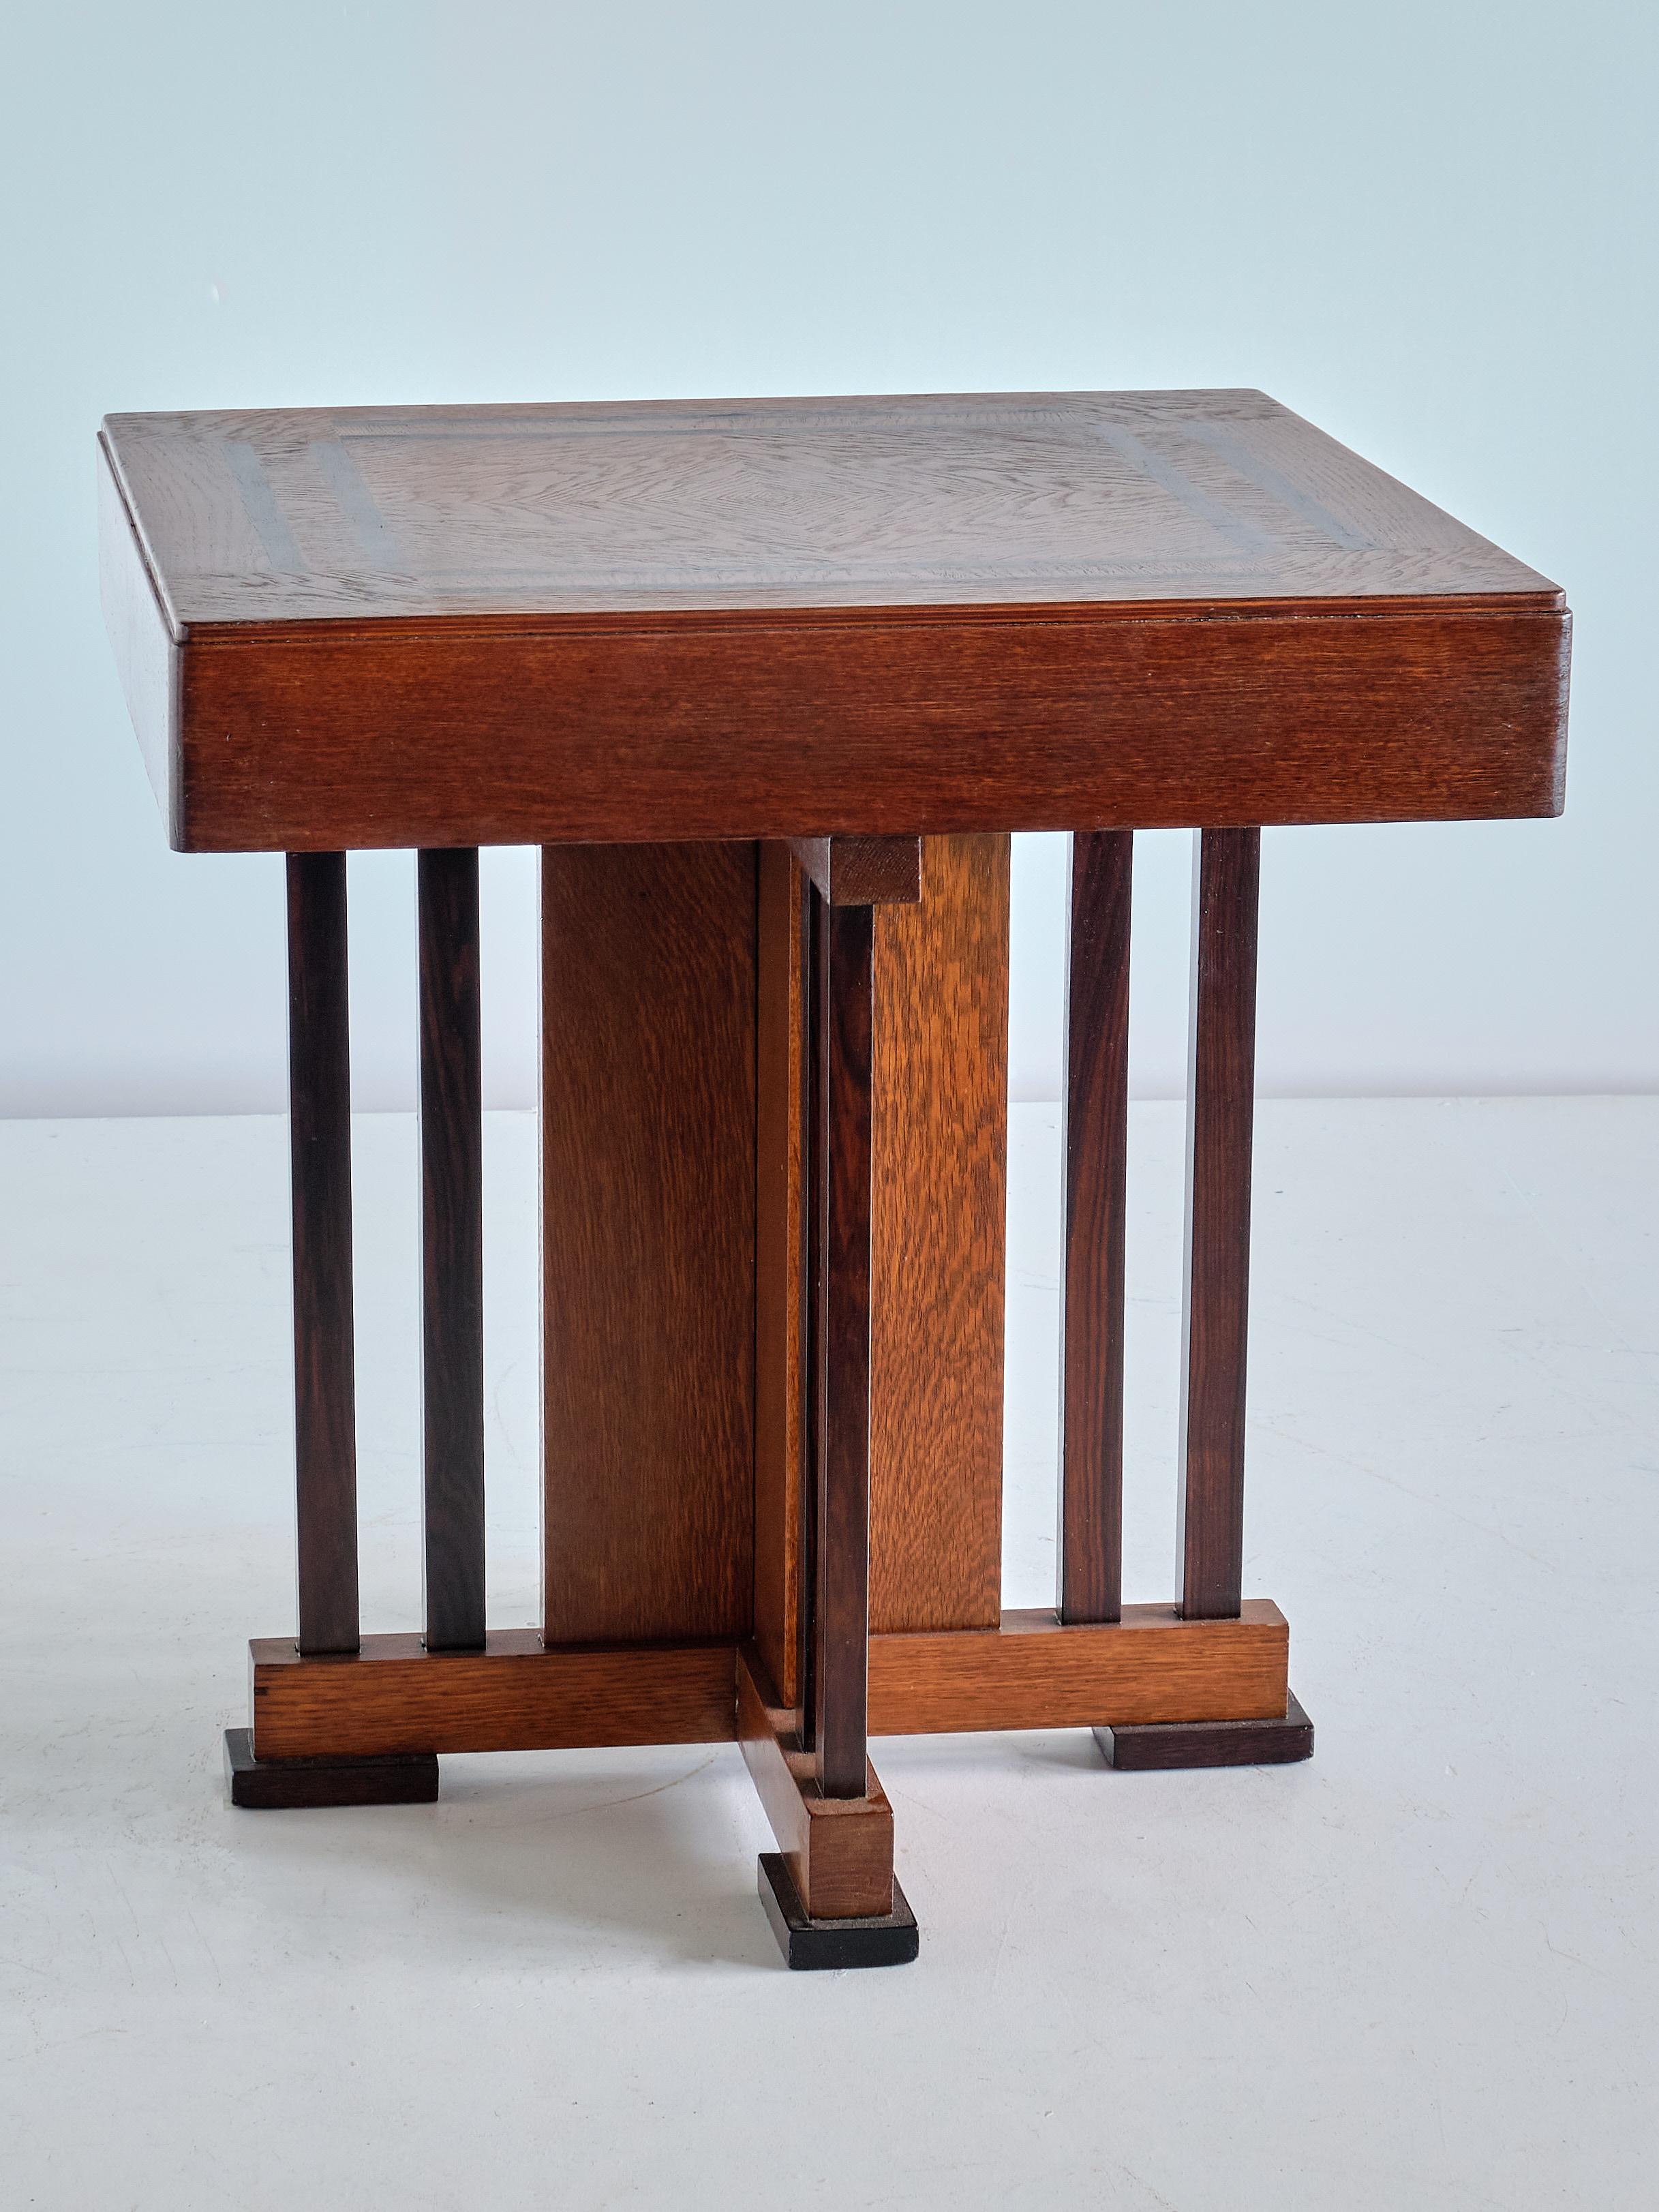 P.E.L. Izeren Side Table in Oak and Macassar Ebony, Netherlands, 1930s For Sale 4